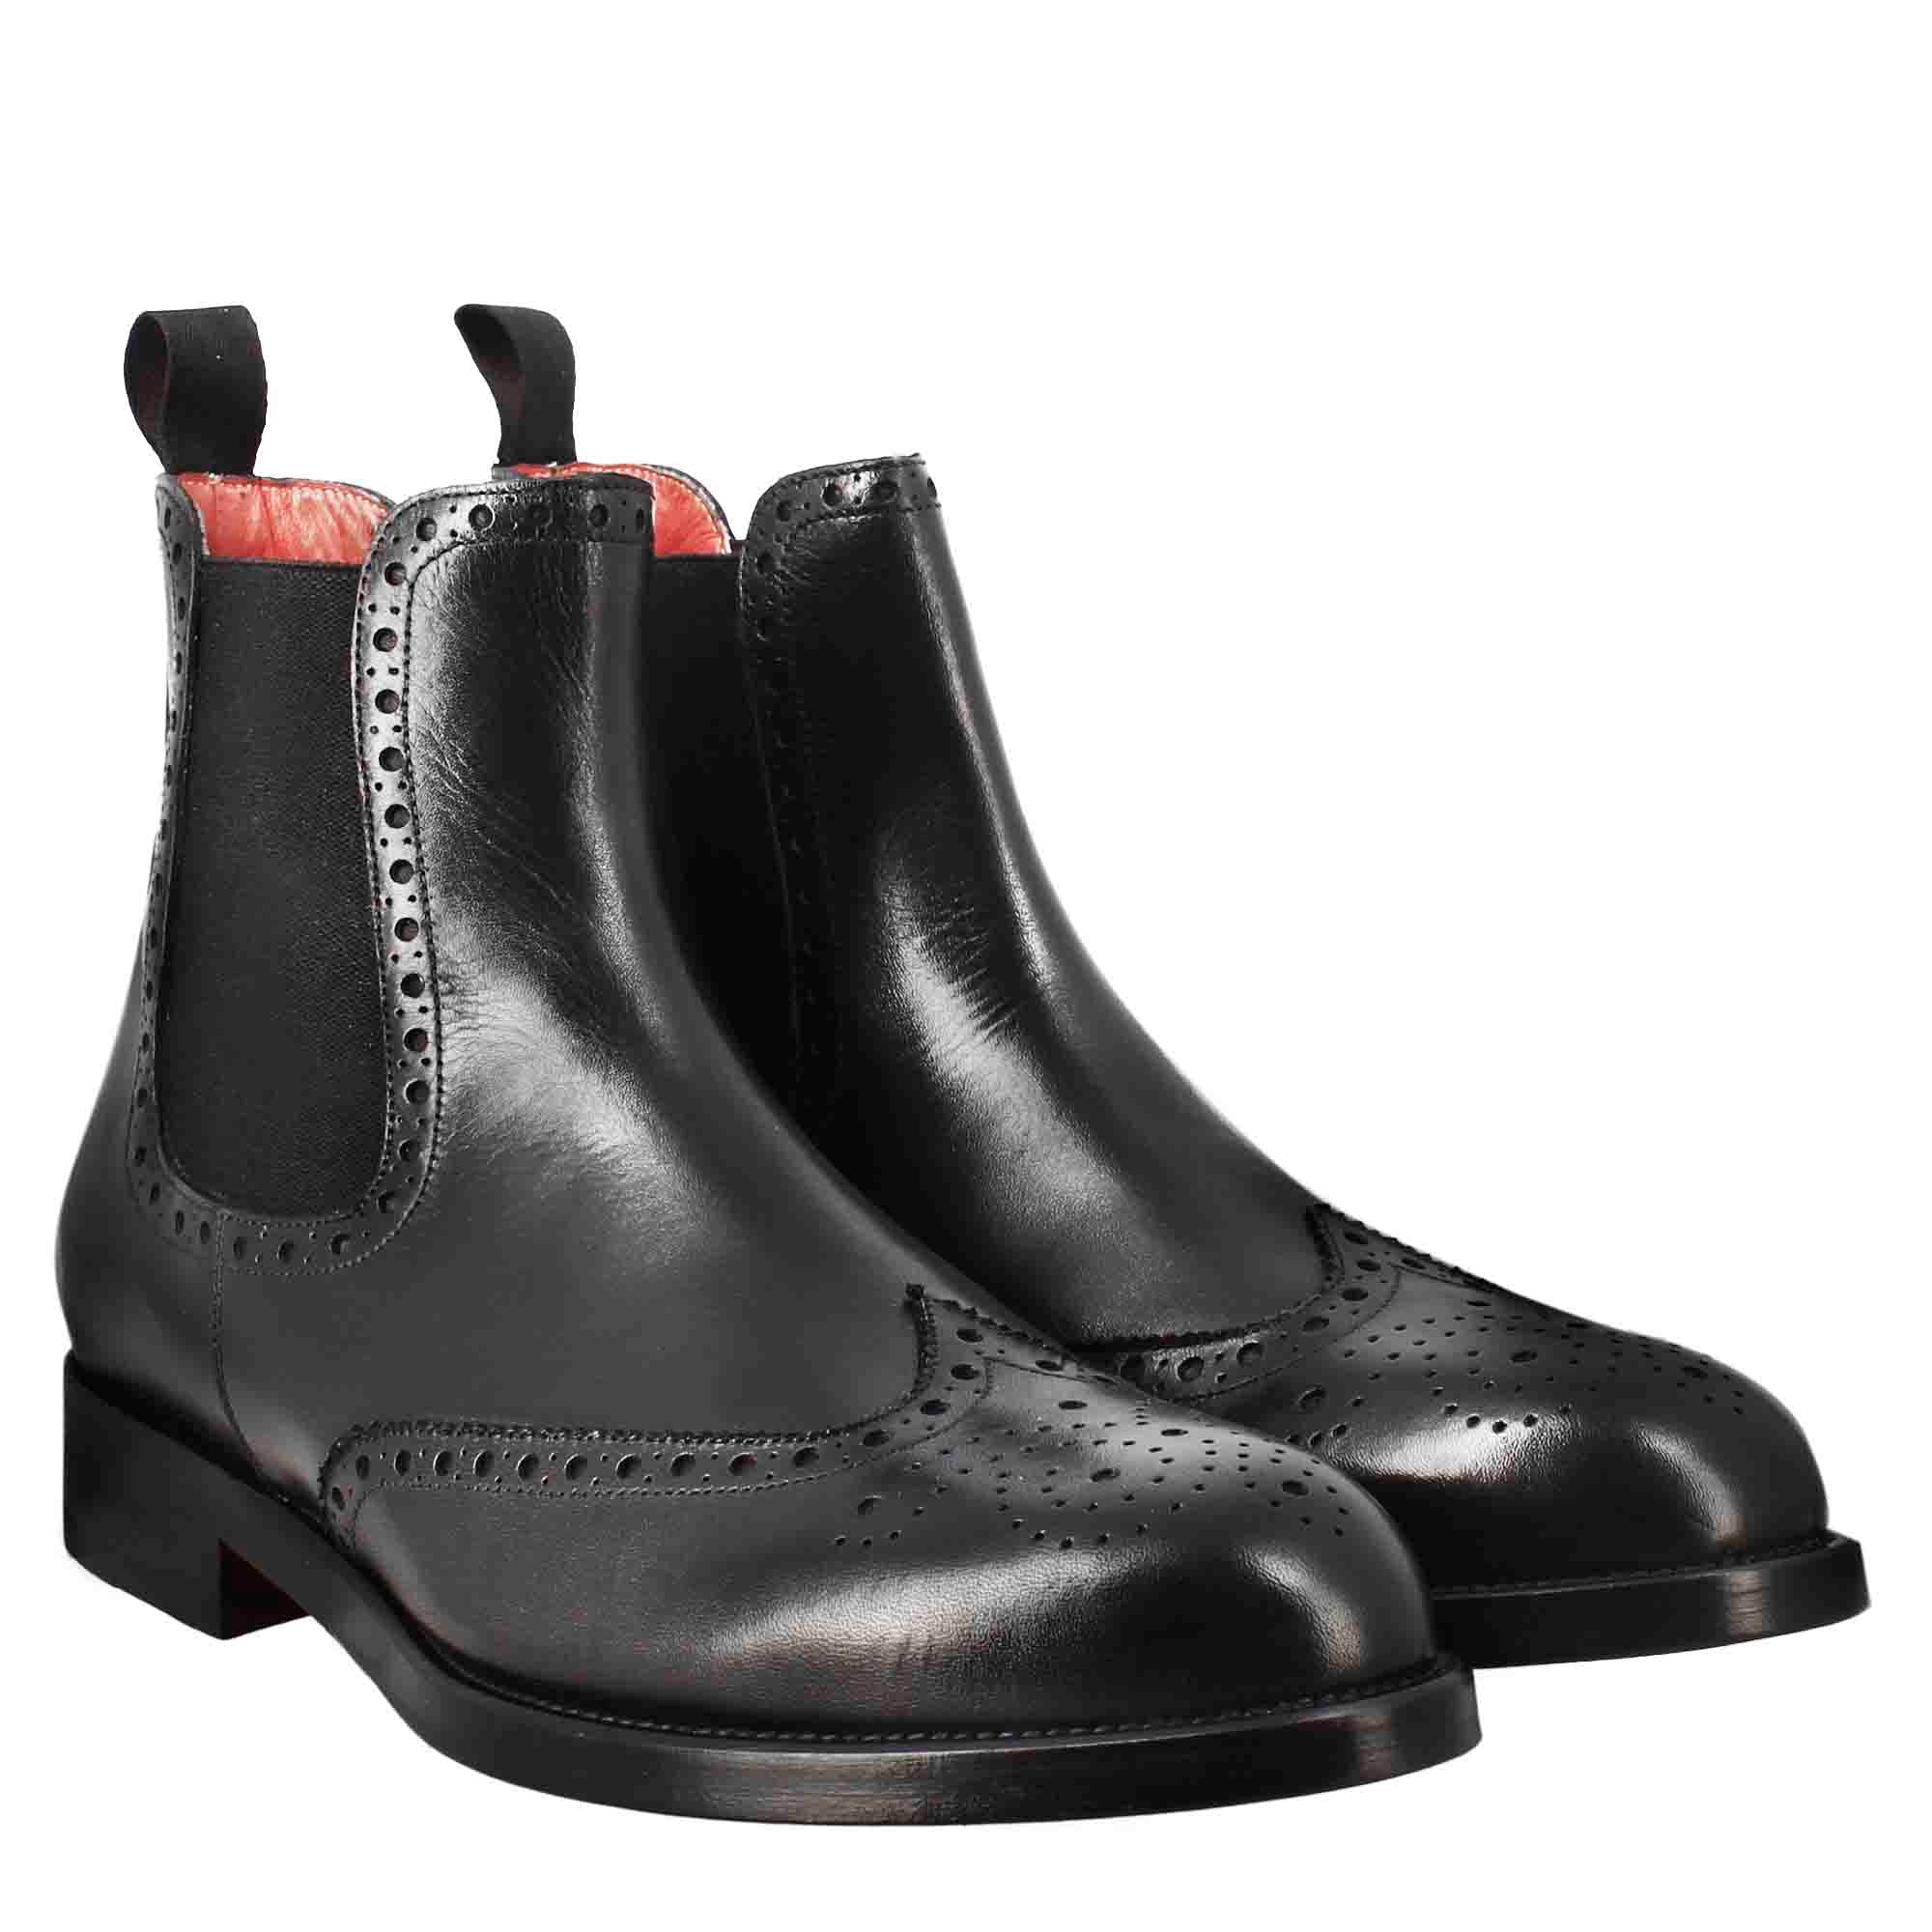 Black Chelsea Boot with Brogue Details